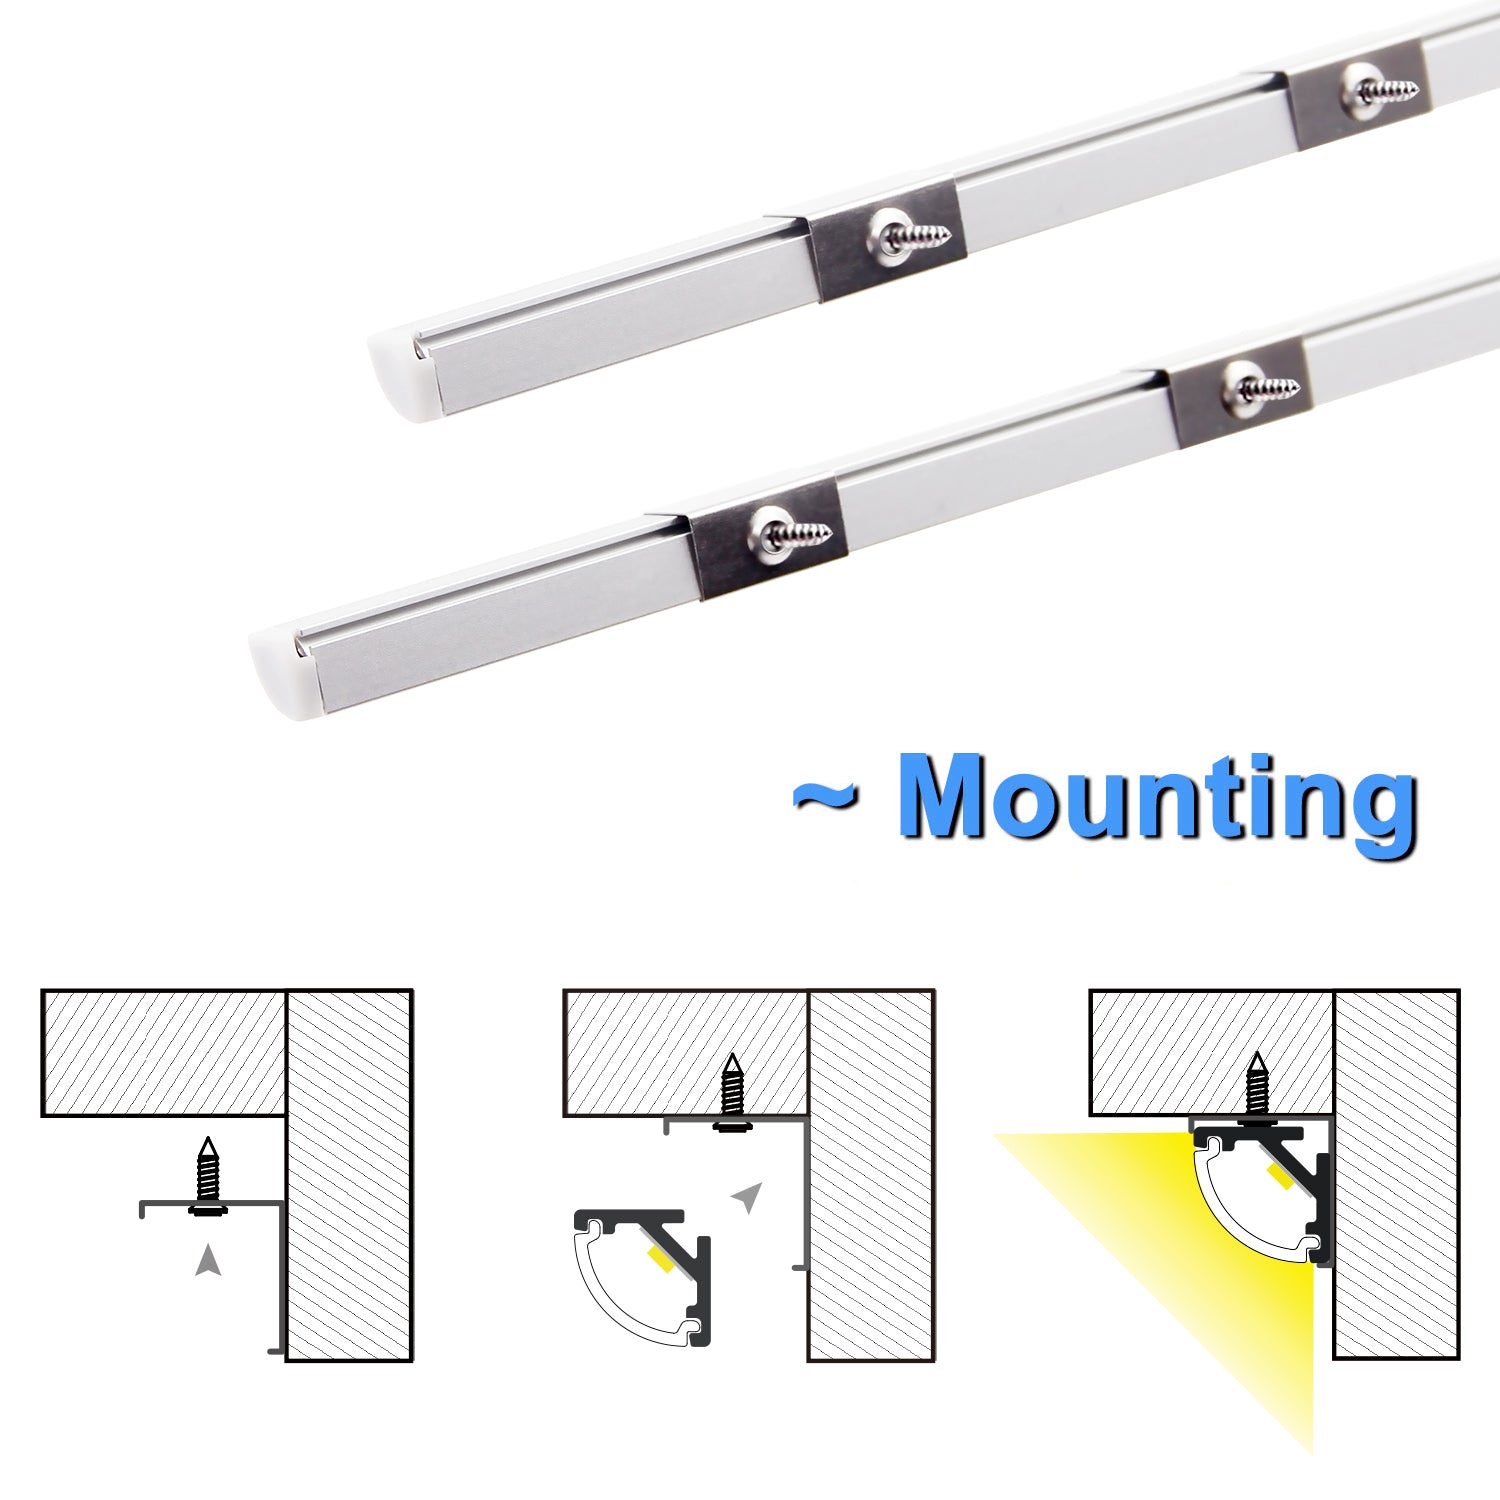 Send an inquiry for 45 Degree LED Strip Light Mounting Channel AL6063 LED Aluminium Profile to high quality LED Strip Light Mounting Channel supplier. Wholesale LED Aluminium Profile directly from China LED Strip Light Mounting Channel manufacturers/exporters. Get a factory sale price list and become a distributor/agent-vstled.com